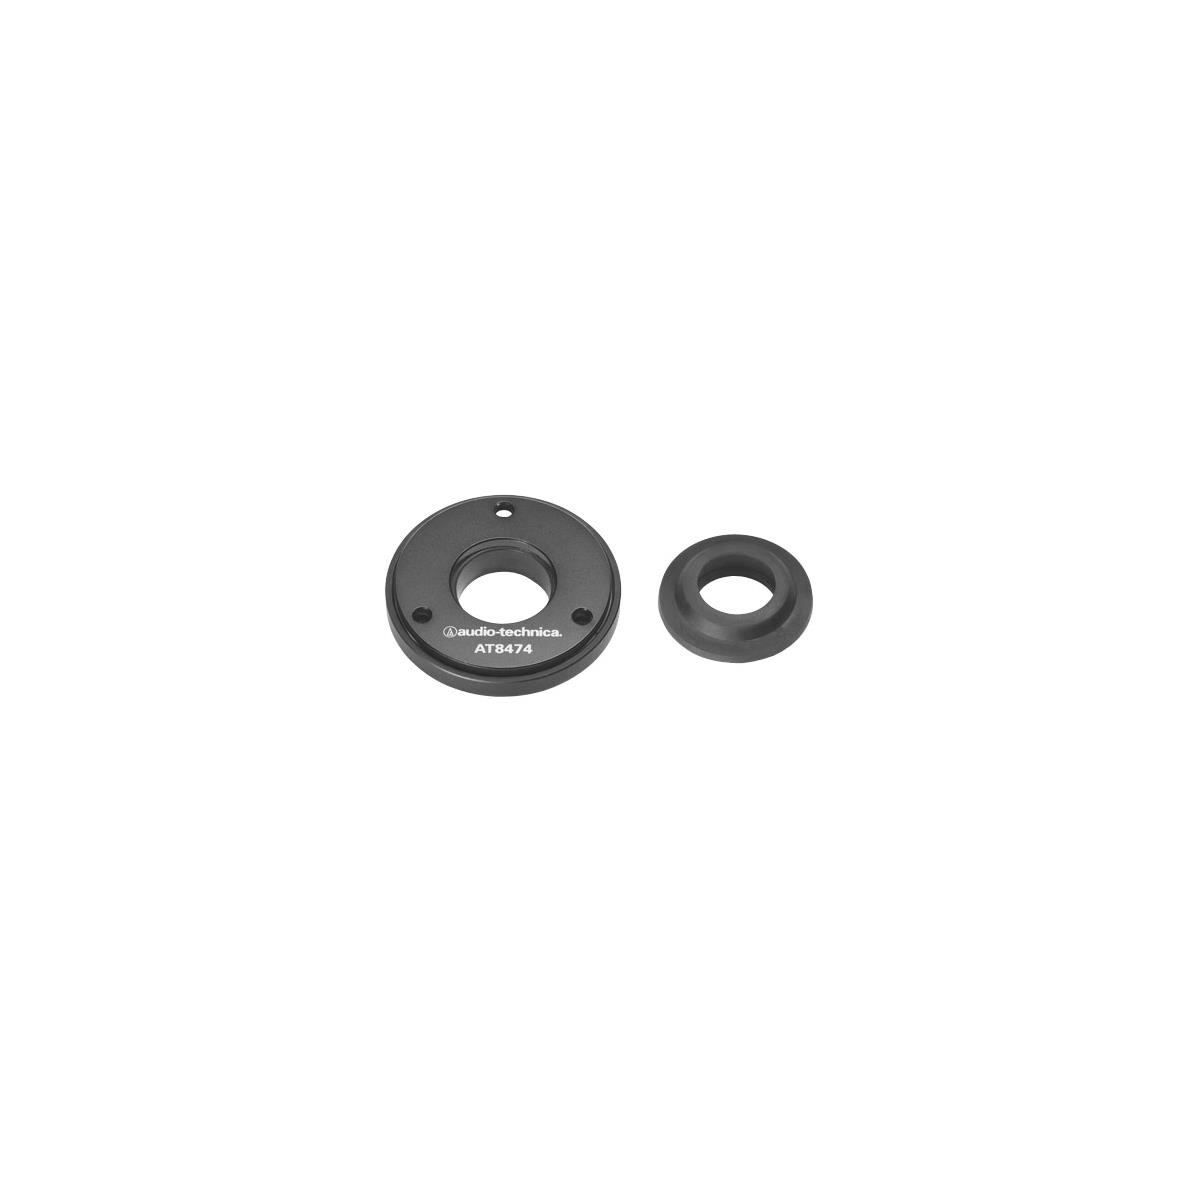 Image of Audio-Technica AT8474 Low Profile Isolation Mount for Audio-Technica Microphones